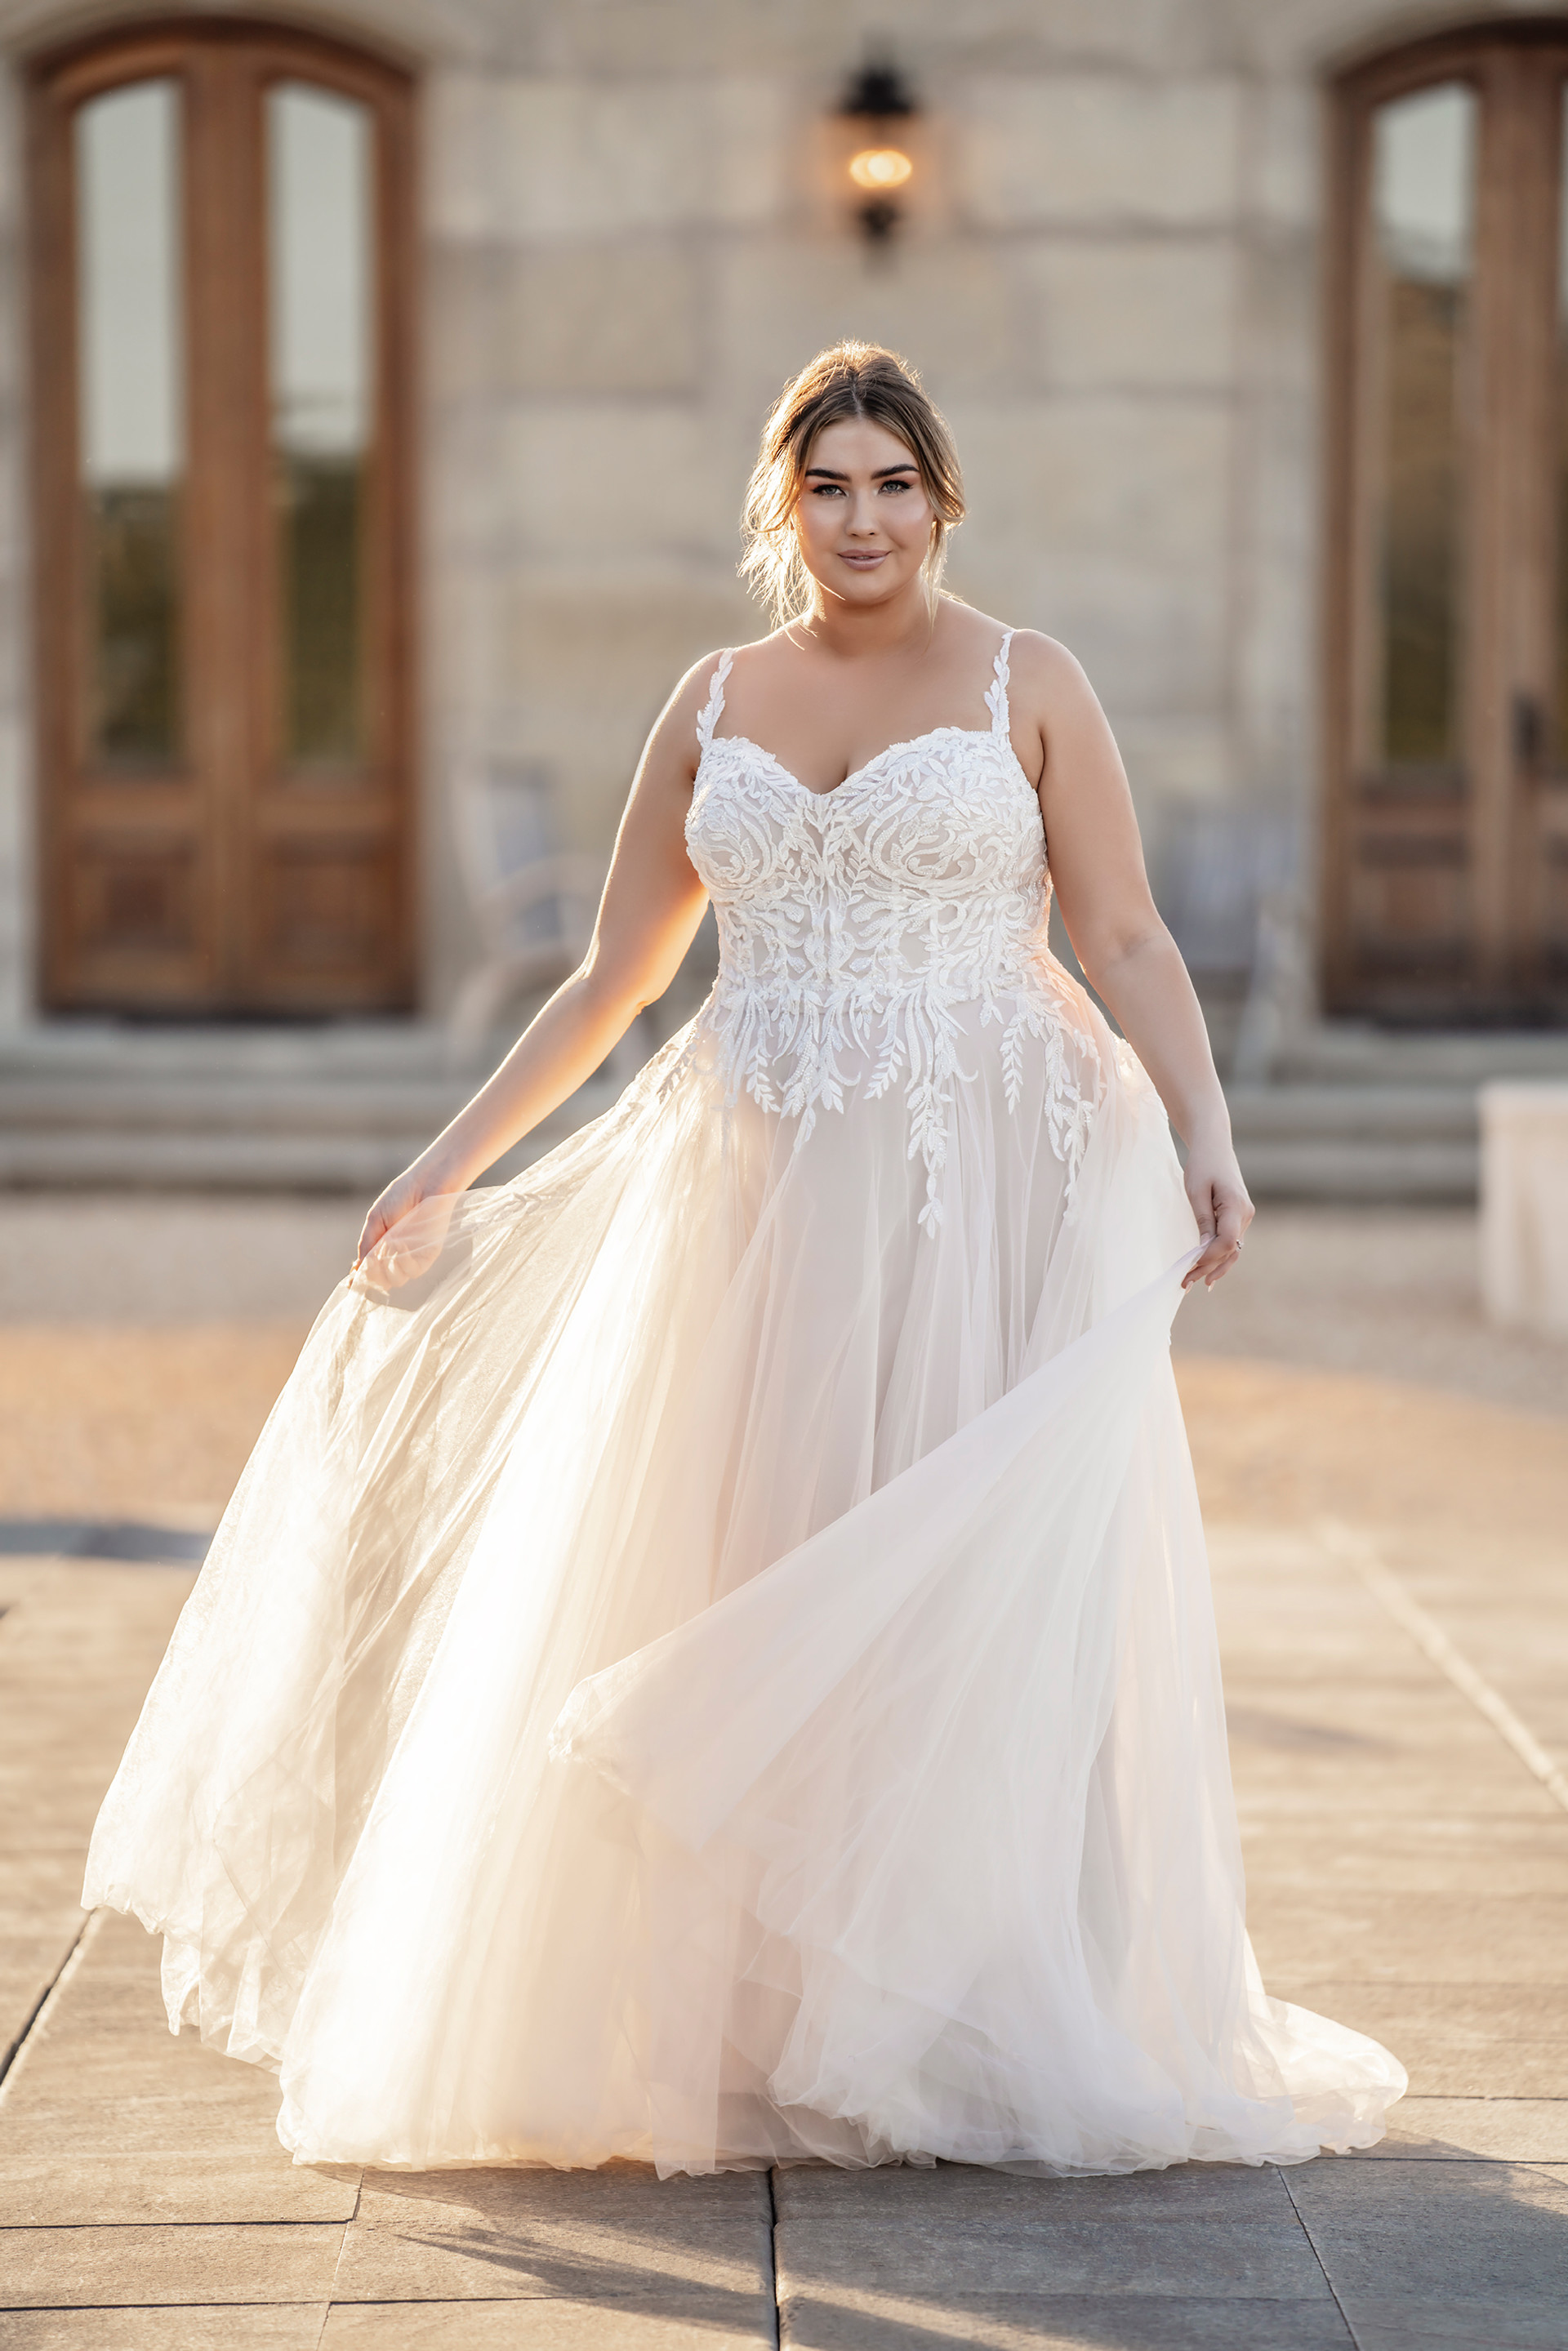 R3607L - The Lined Version of R3607 by Allure Romance